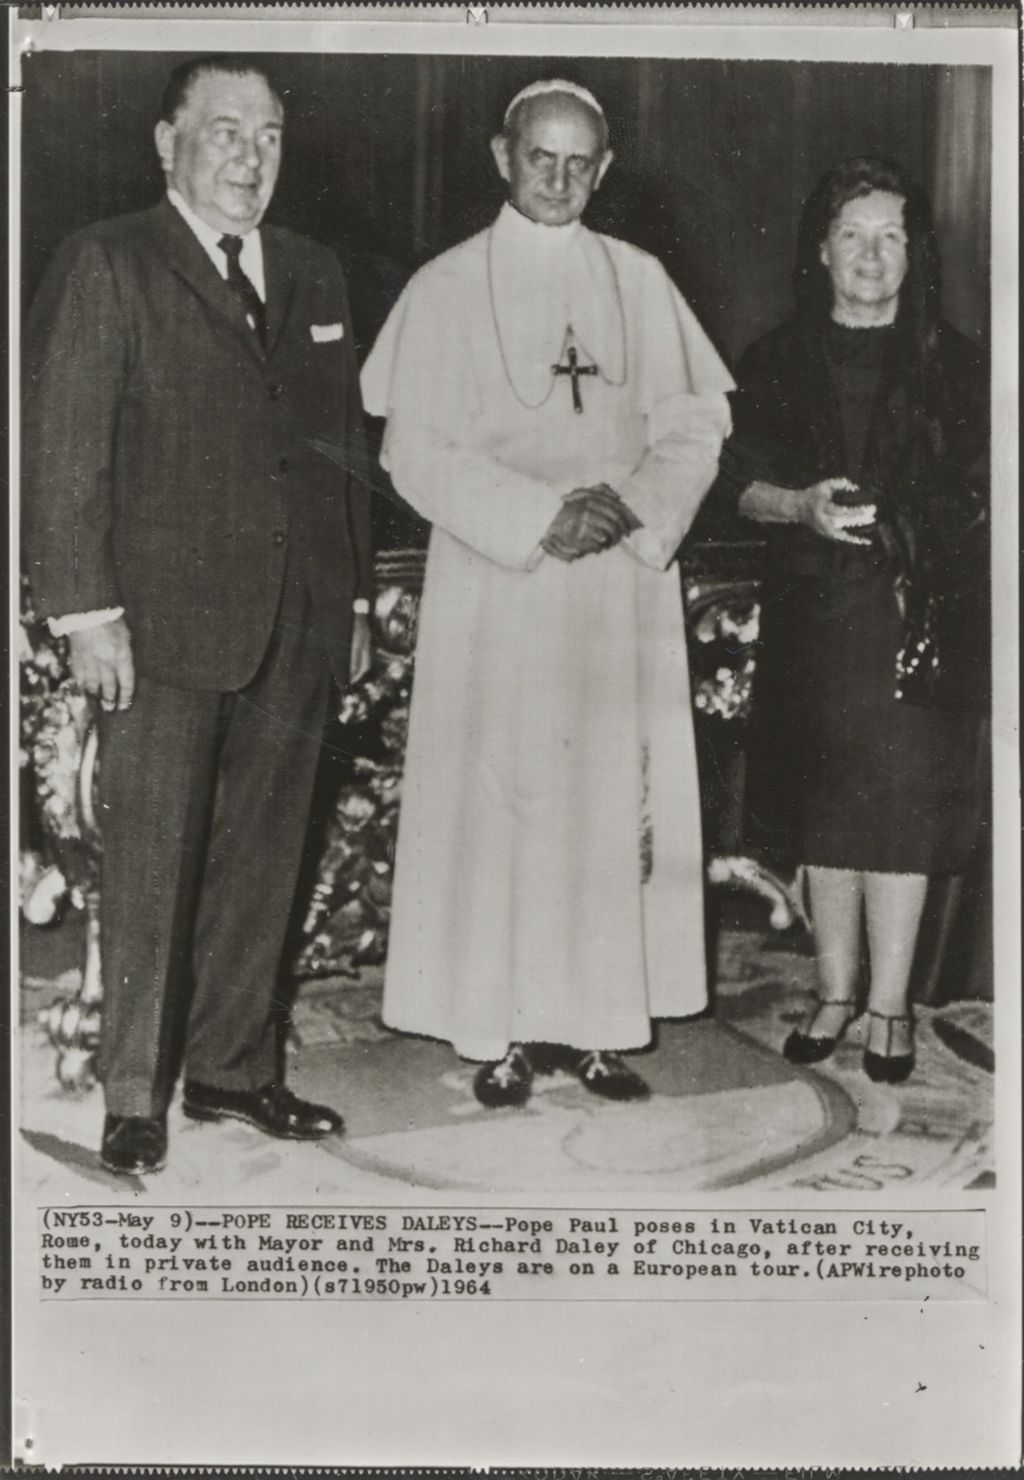 Richard J. Daley and Eleanor Daley with Pope Paul VI during their trip to Rome